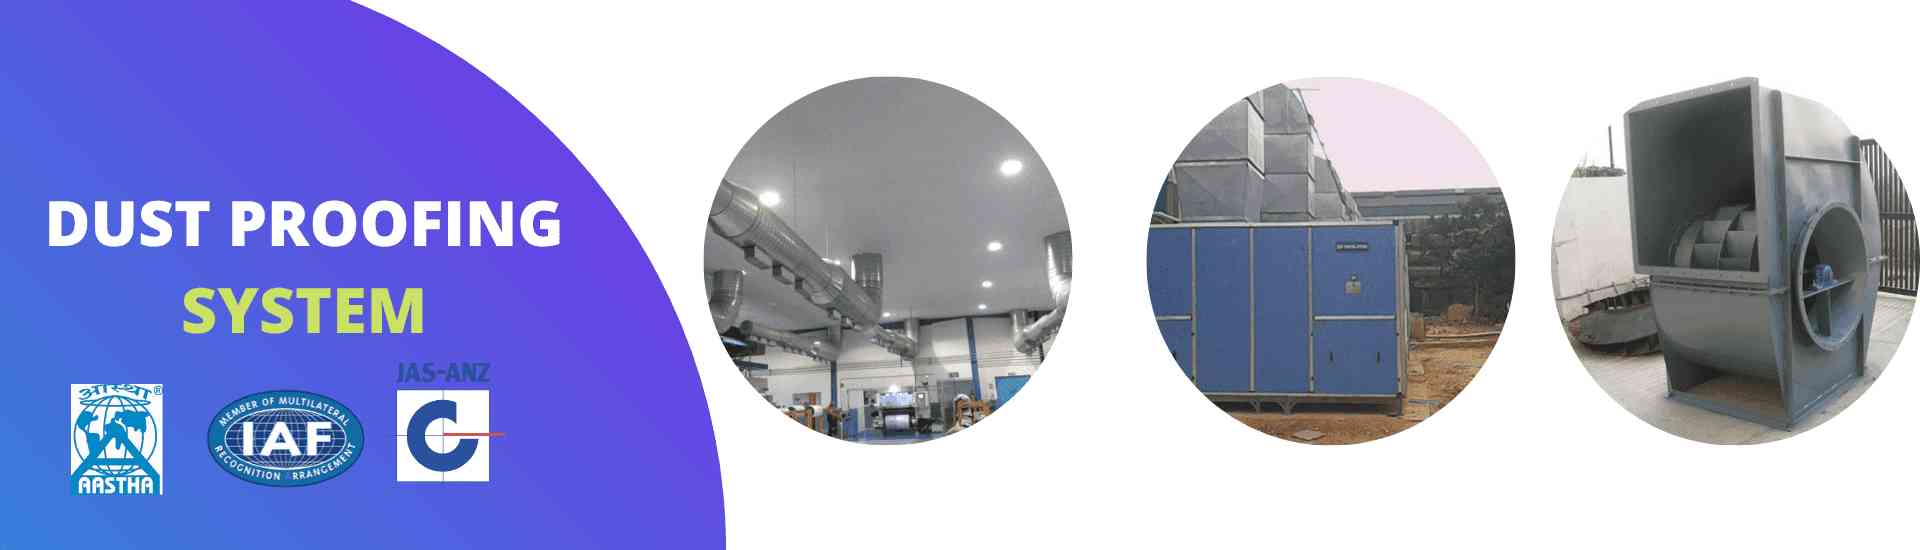 Dust Proofing System - Aastha Enviro